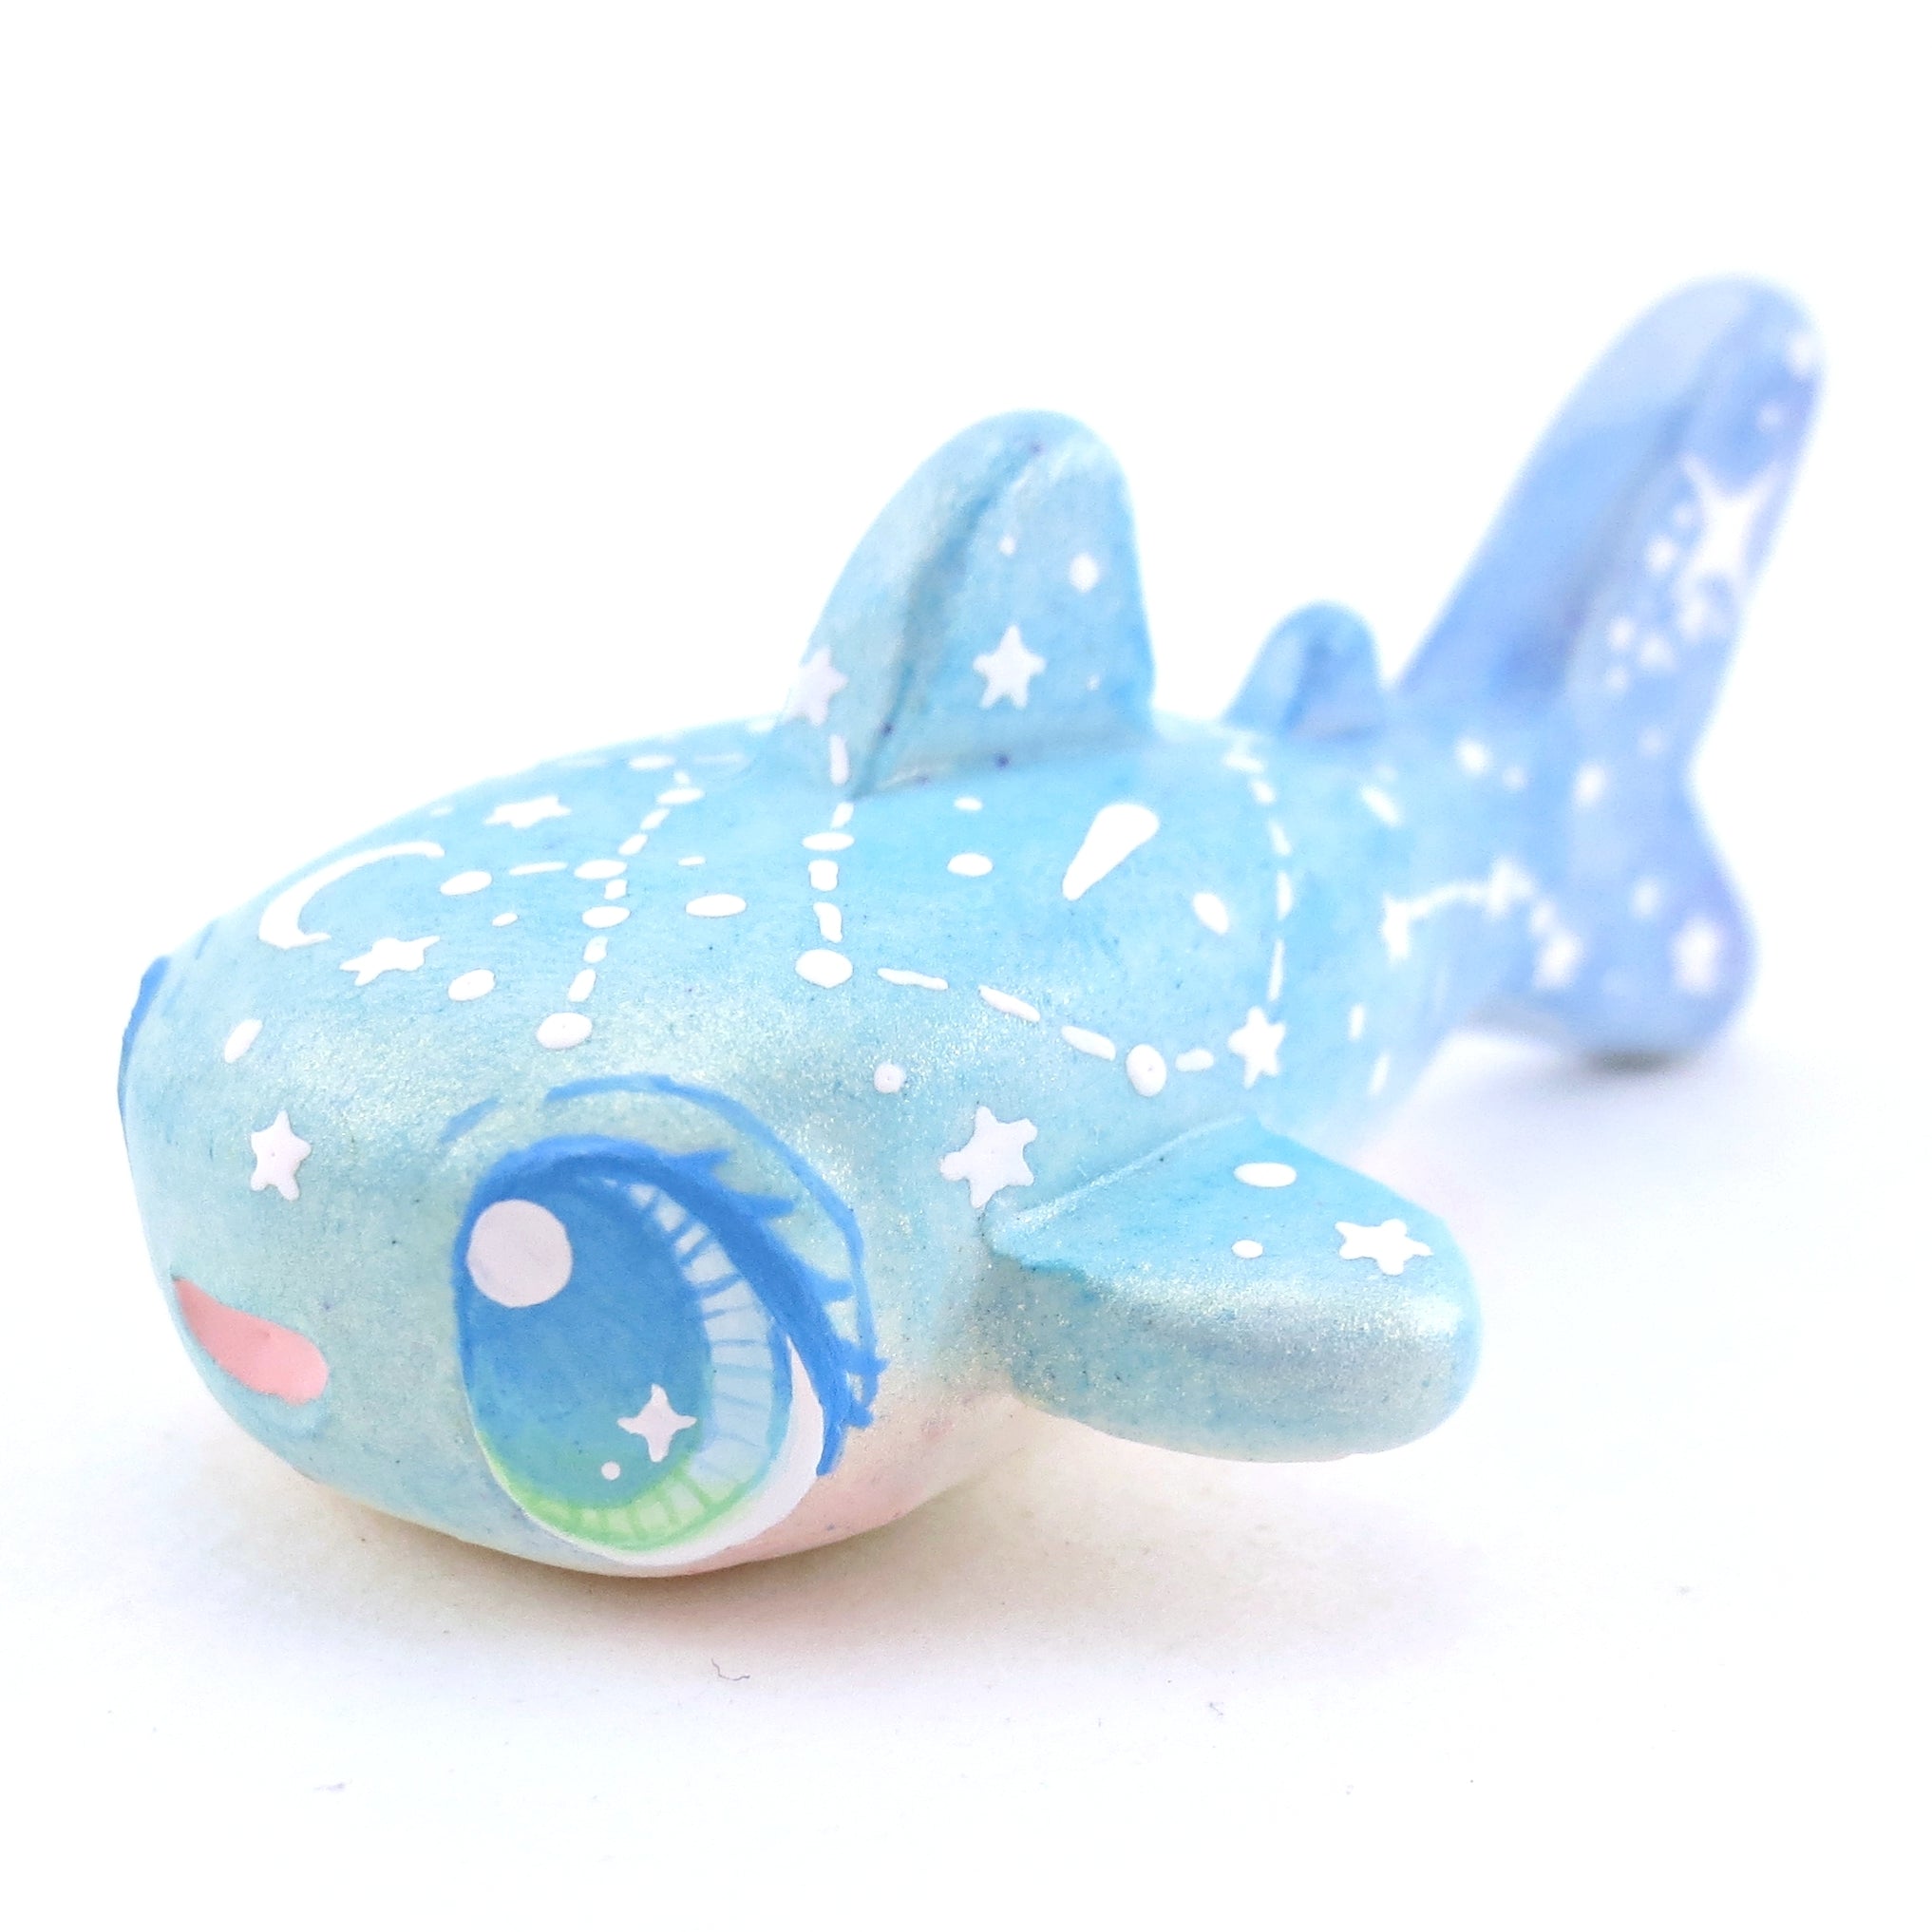 Green/Blue Constellation Ombre Whale Shark Figurine - Polymer Clay Enchanted Ocean Animals